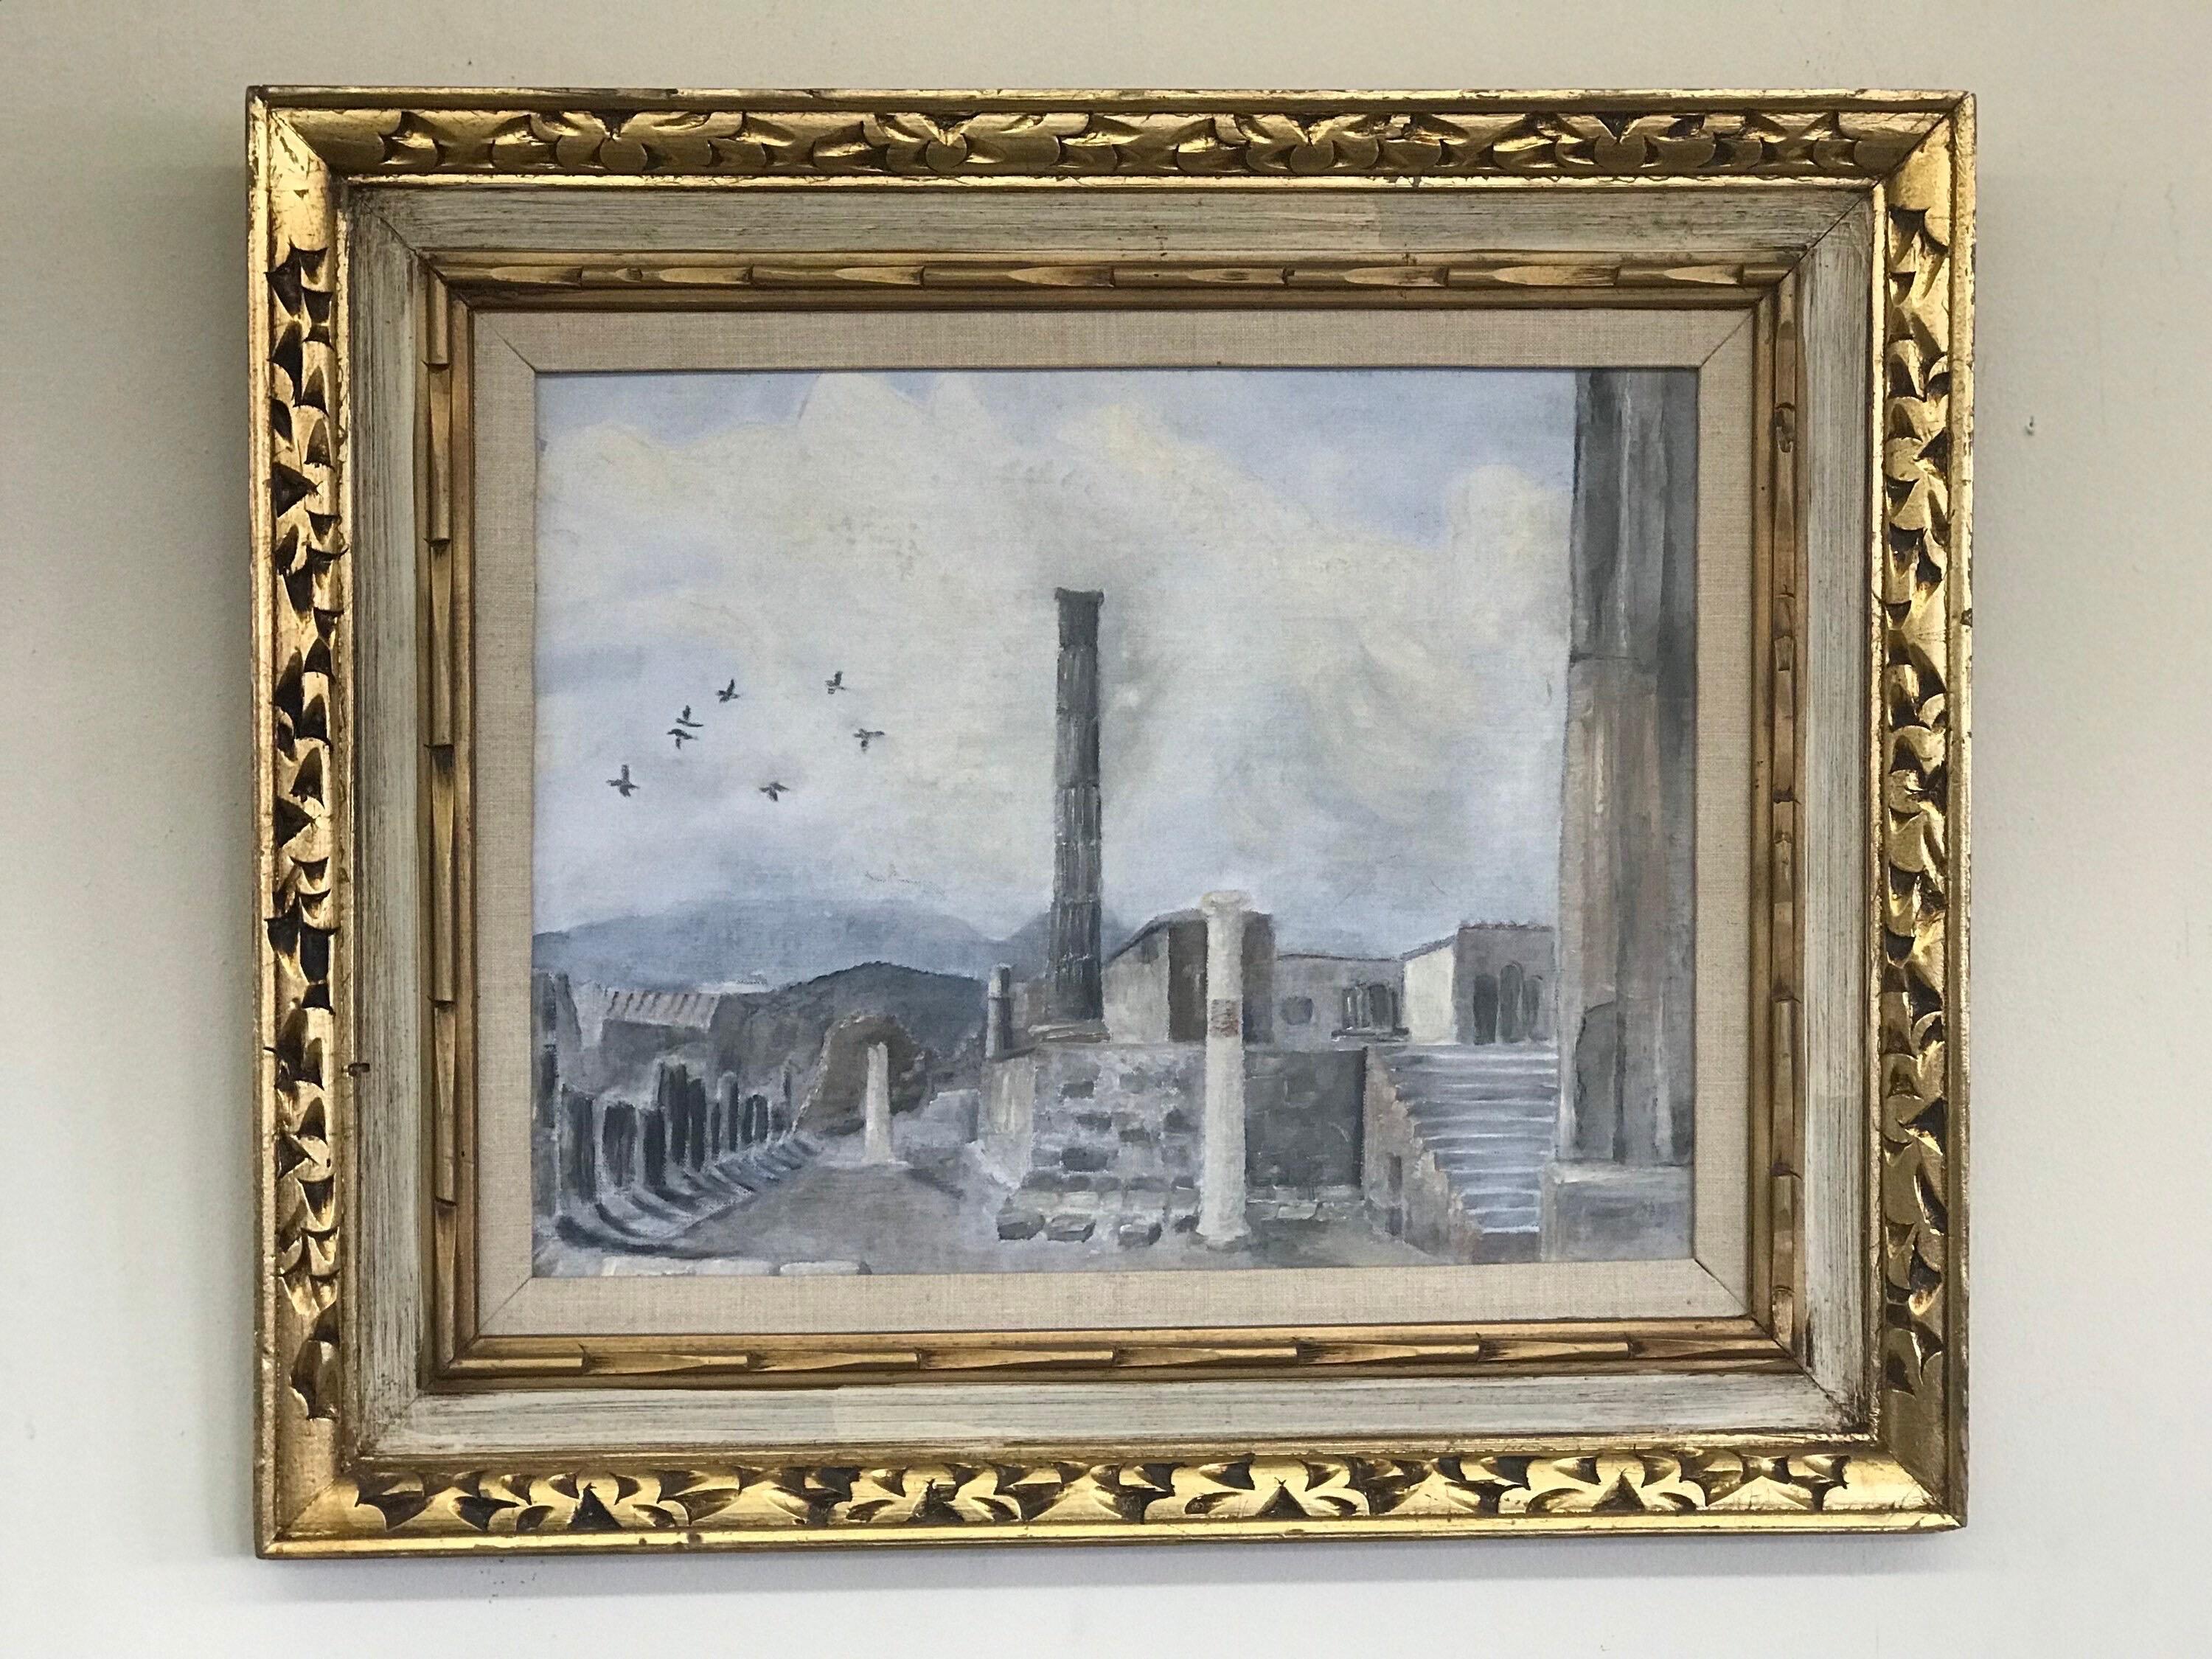 Vintage Art Deco scenic oil painting architectural buildings blue bright birds animal professional framed.

Dimensions. Overall 25 1/2 W; 21 1/2 H; Actual Art 17 1/2 W; 13 1/2 H.